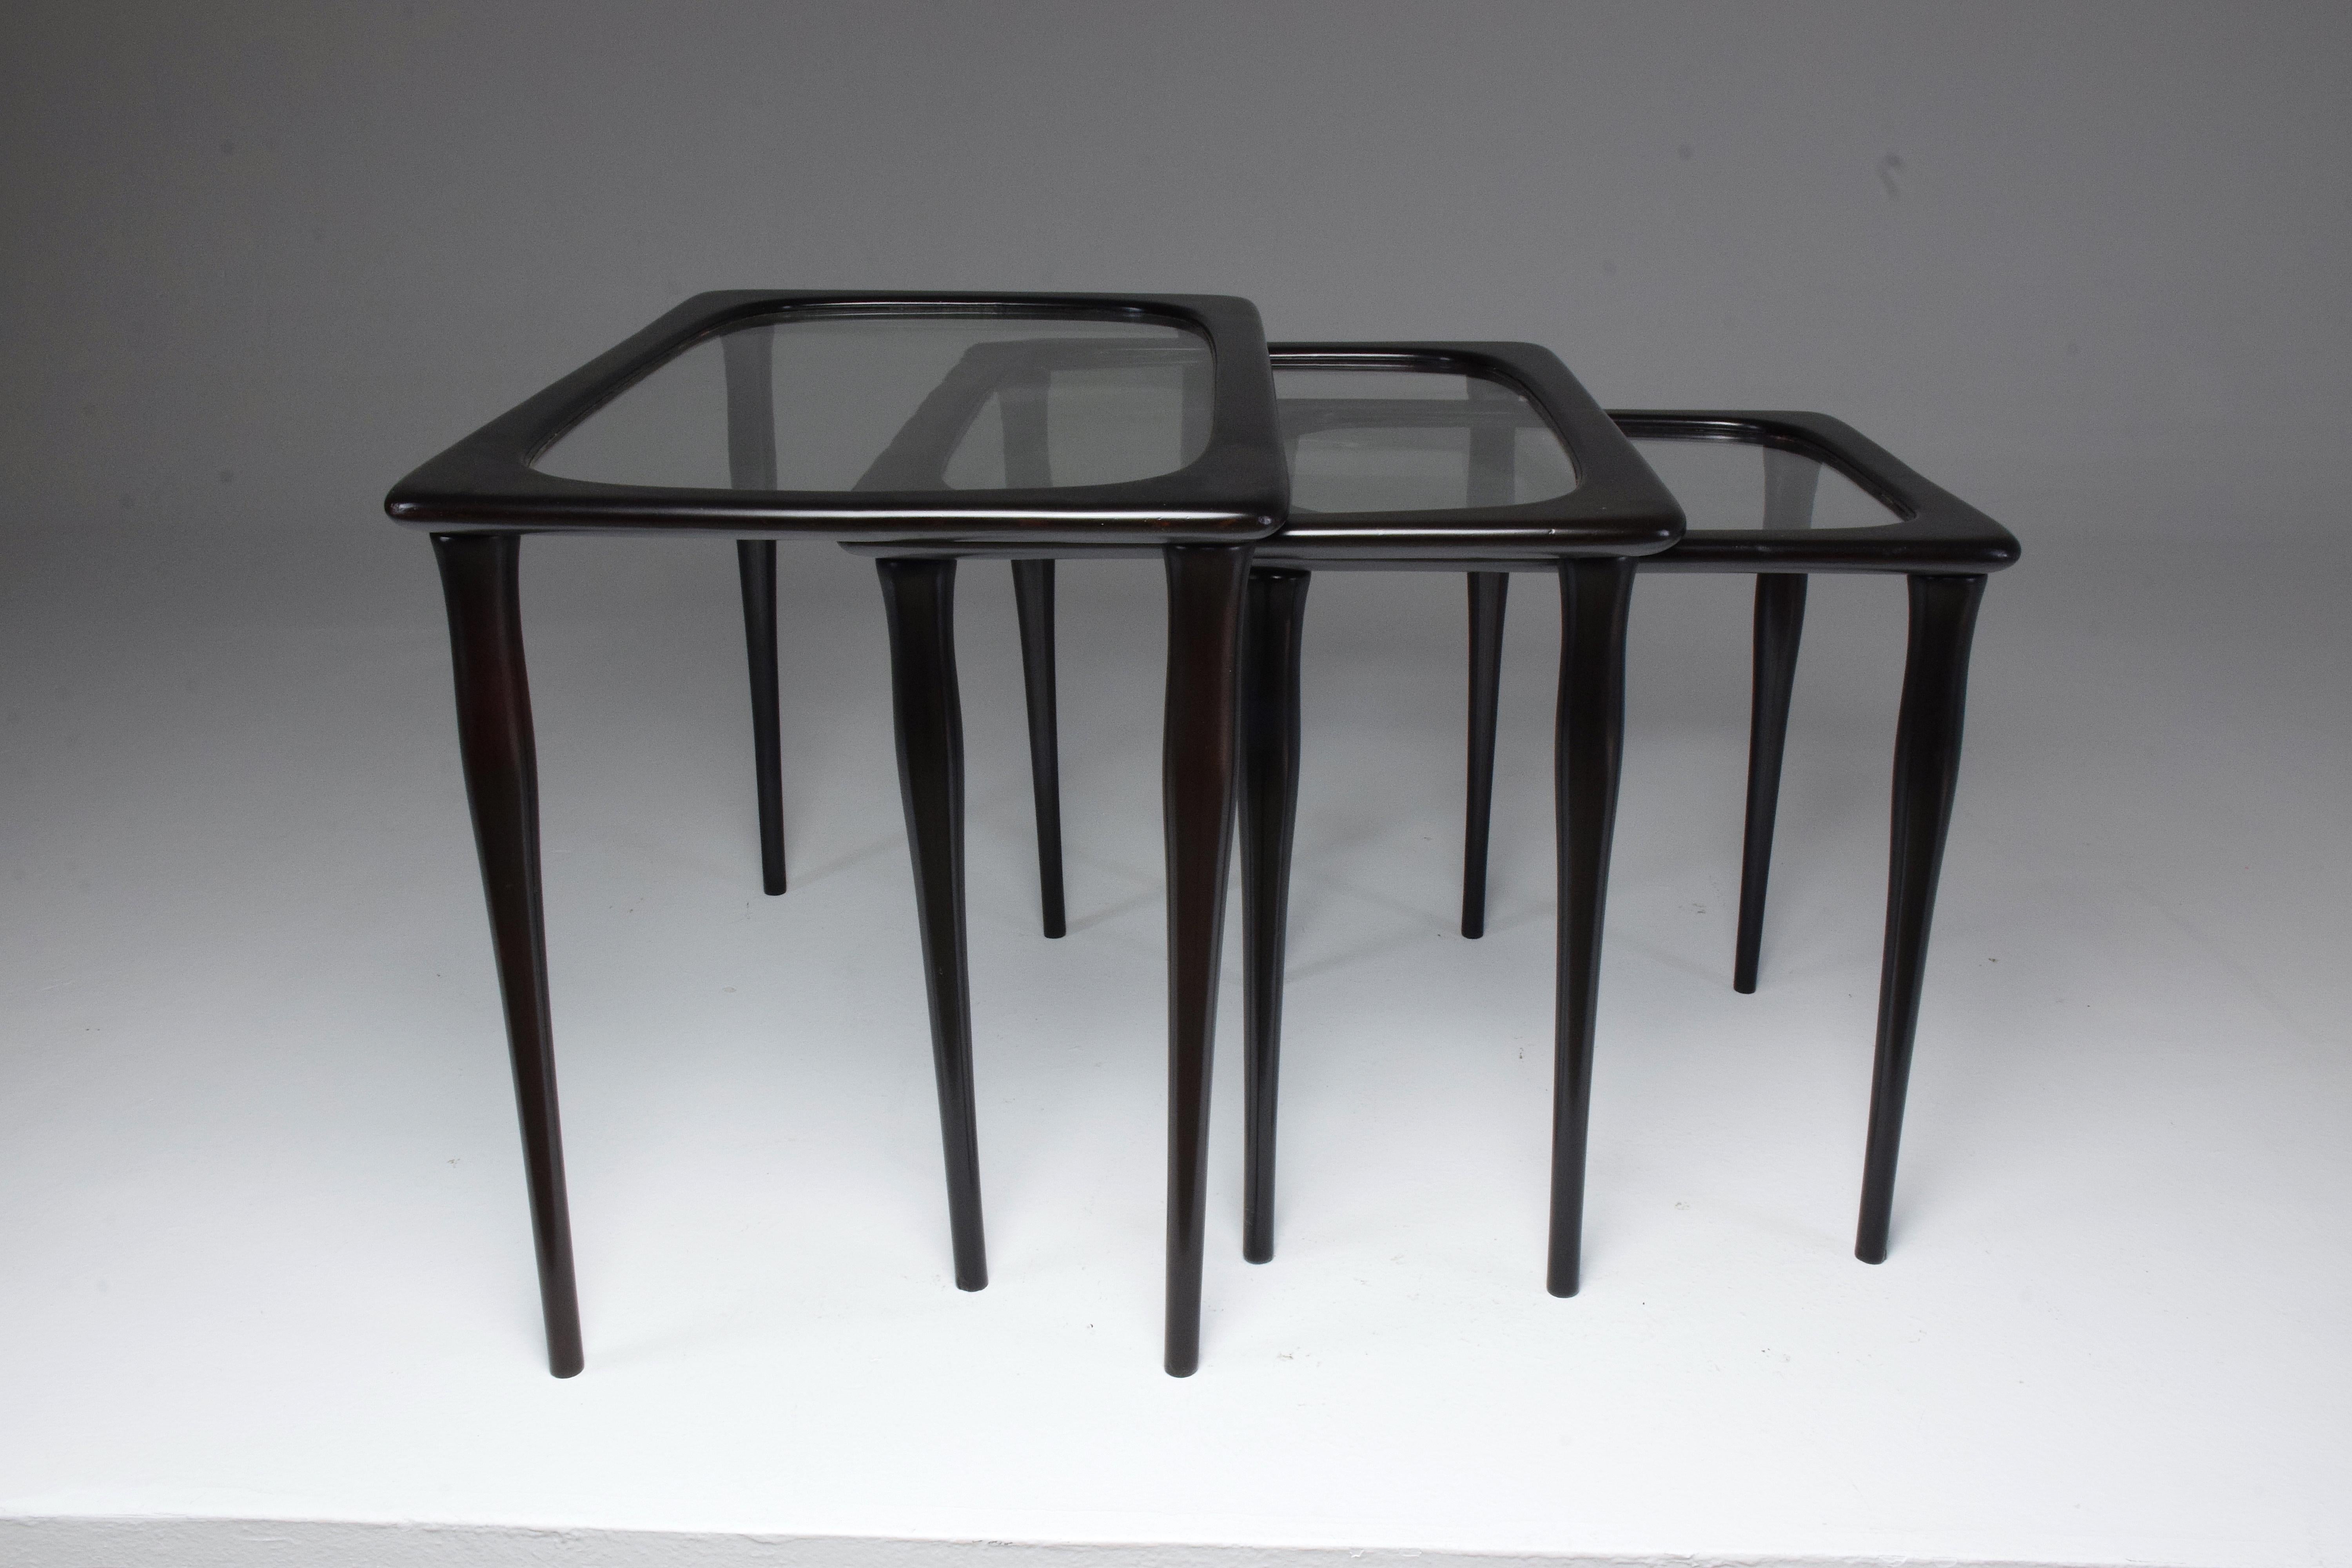 Glass Three Italian Midcentury Nesting Tables by Ico Parisi, 1950s For Sale